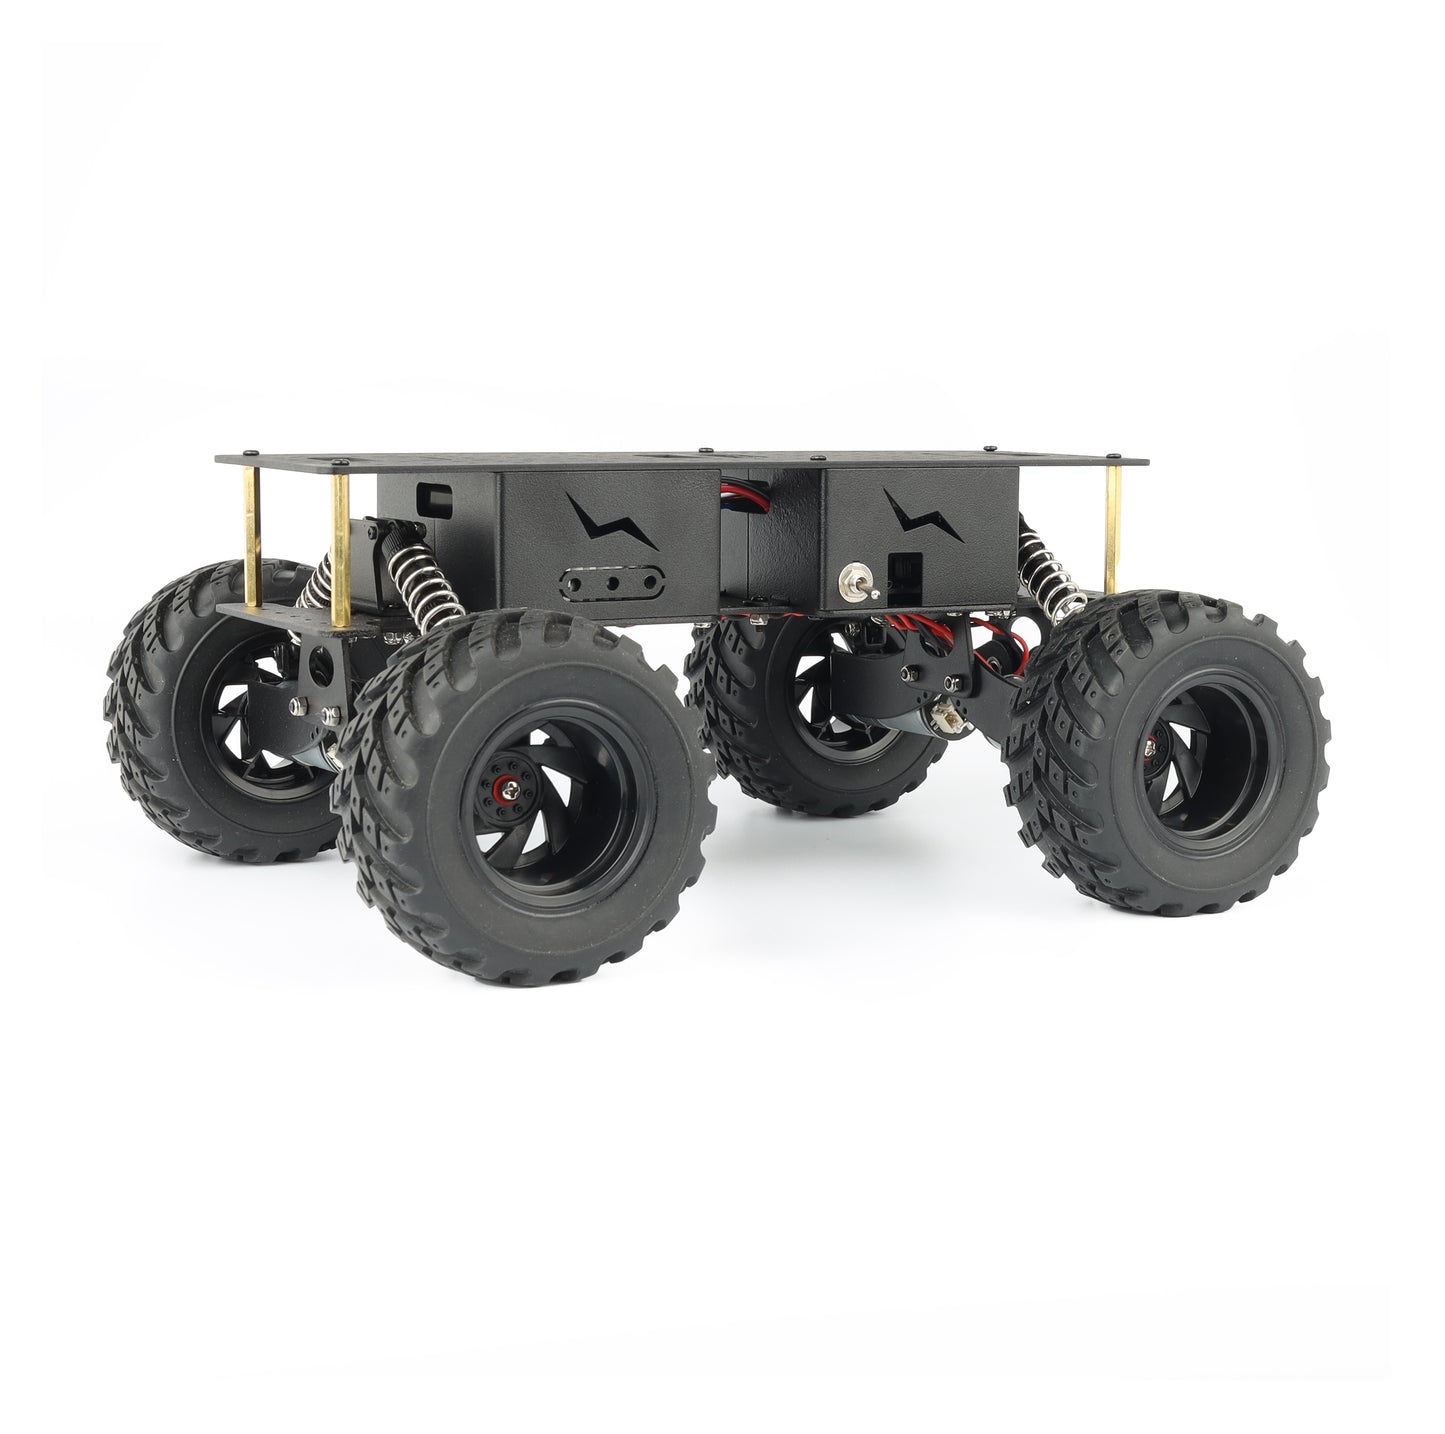 YFROBOT 4WD chassis with shock absorption.34:1